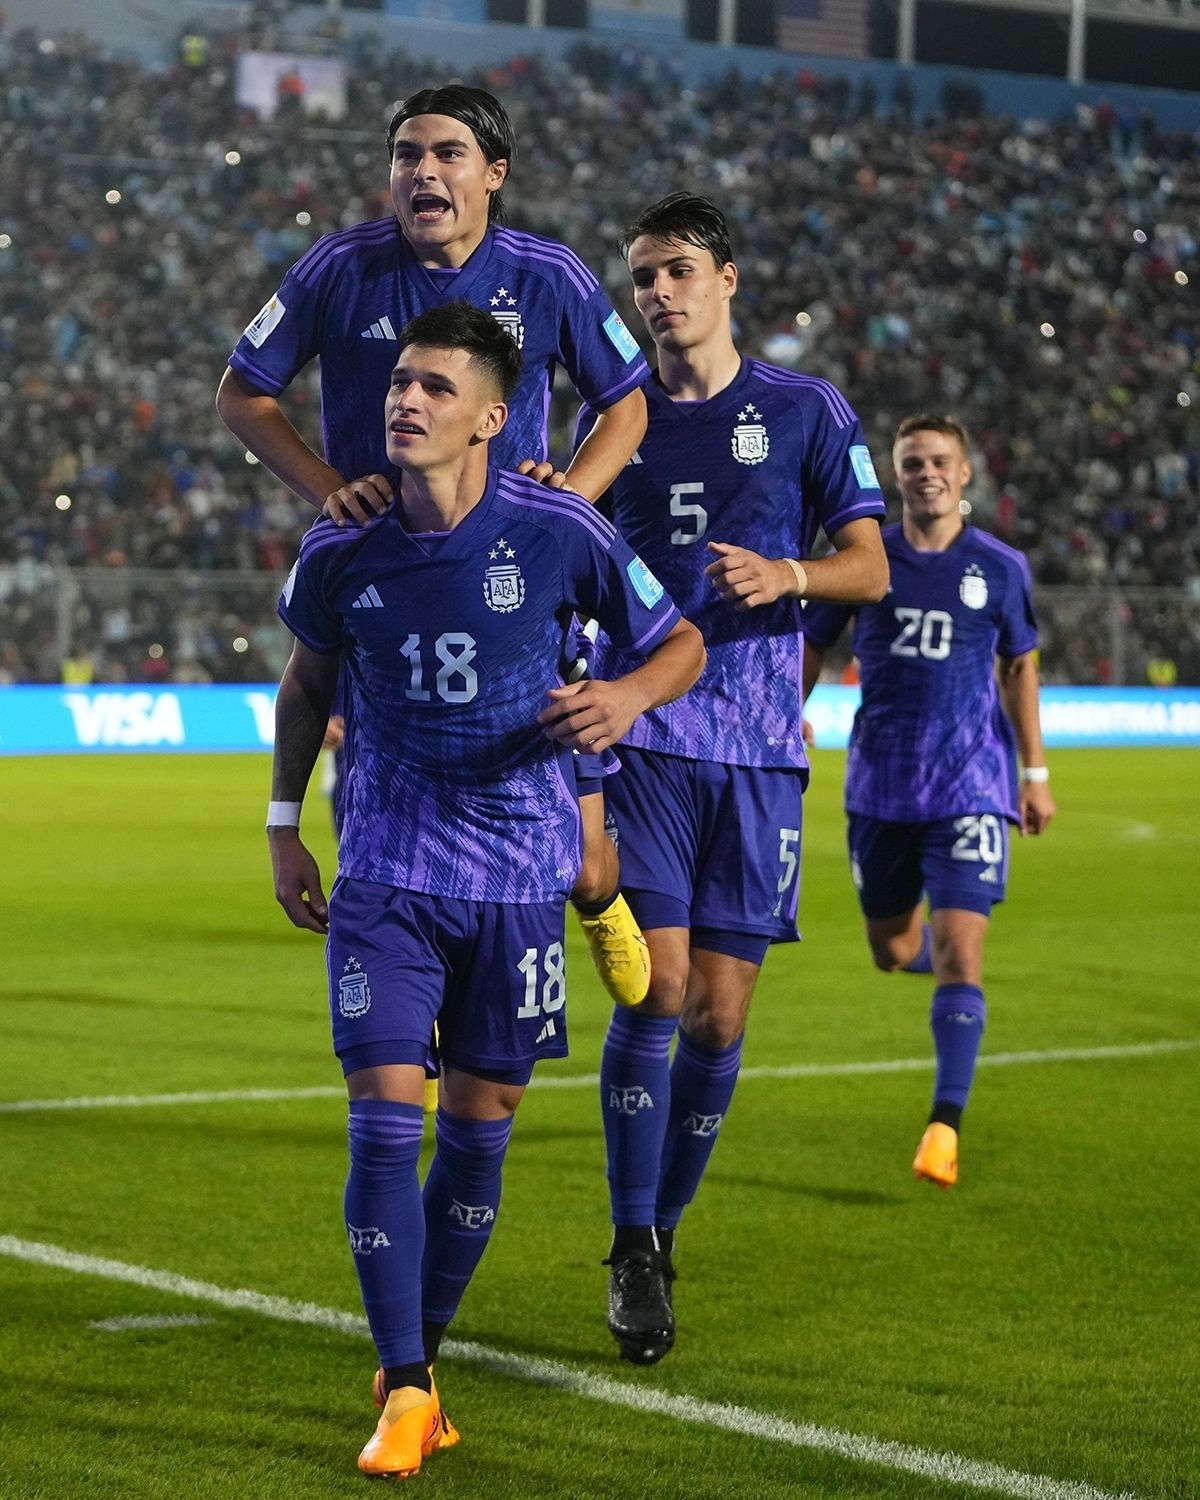 CORRECTS NUMBER OF GOALS SCORED - Argentina's Brian Aguirre (18) celebrates with his teammates after scoring his side's fourth goal against New Zealand during a FIFA U-20 World Cup Group A soccer match at the San Juan stadium in San Juan, Argentina, Friday, May 26, 2023. (AP Photo/Natacha Pisarenko)